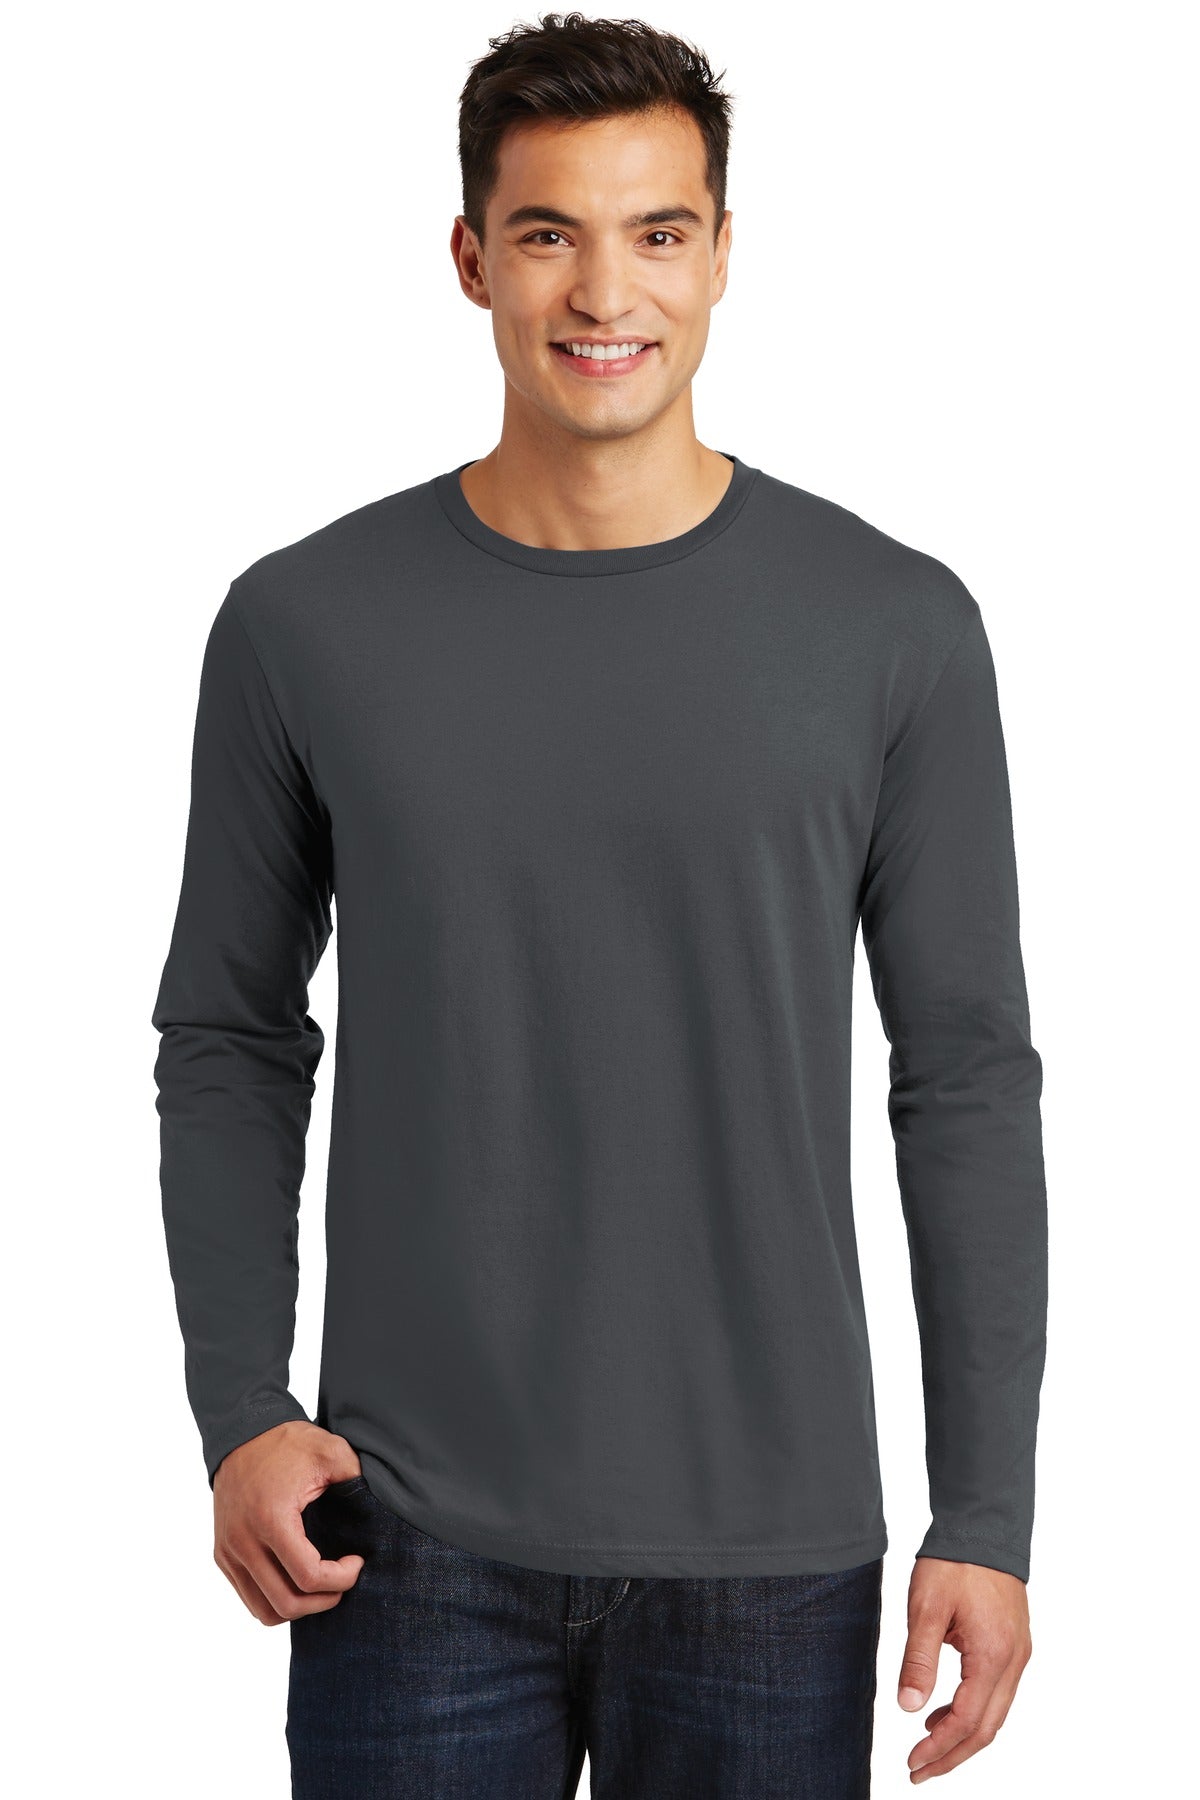 District ® Perfect Weight® Long Sleeve Tee. DT105 - DFW Impression